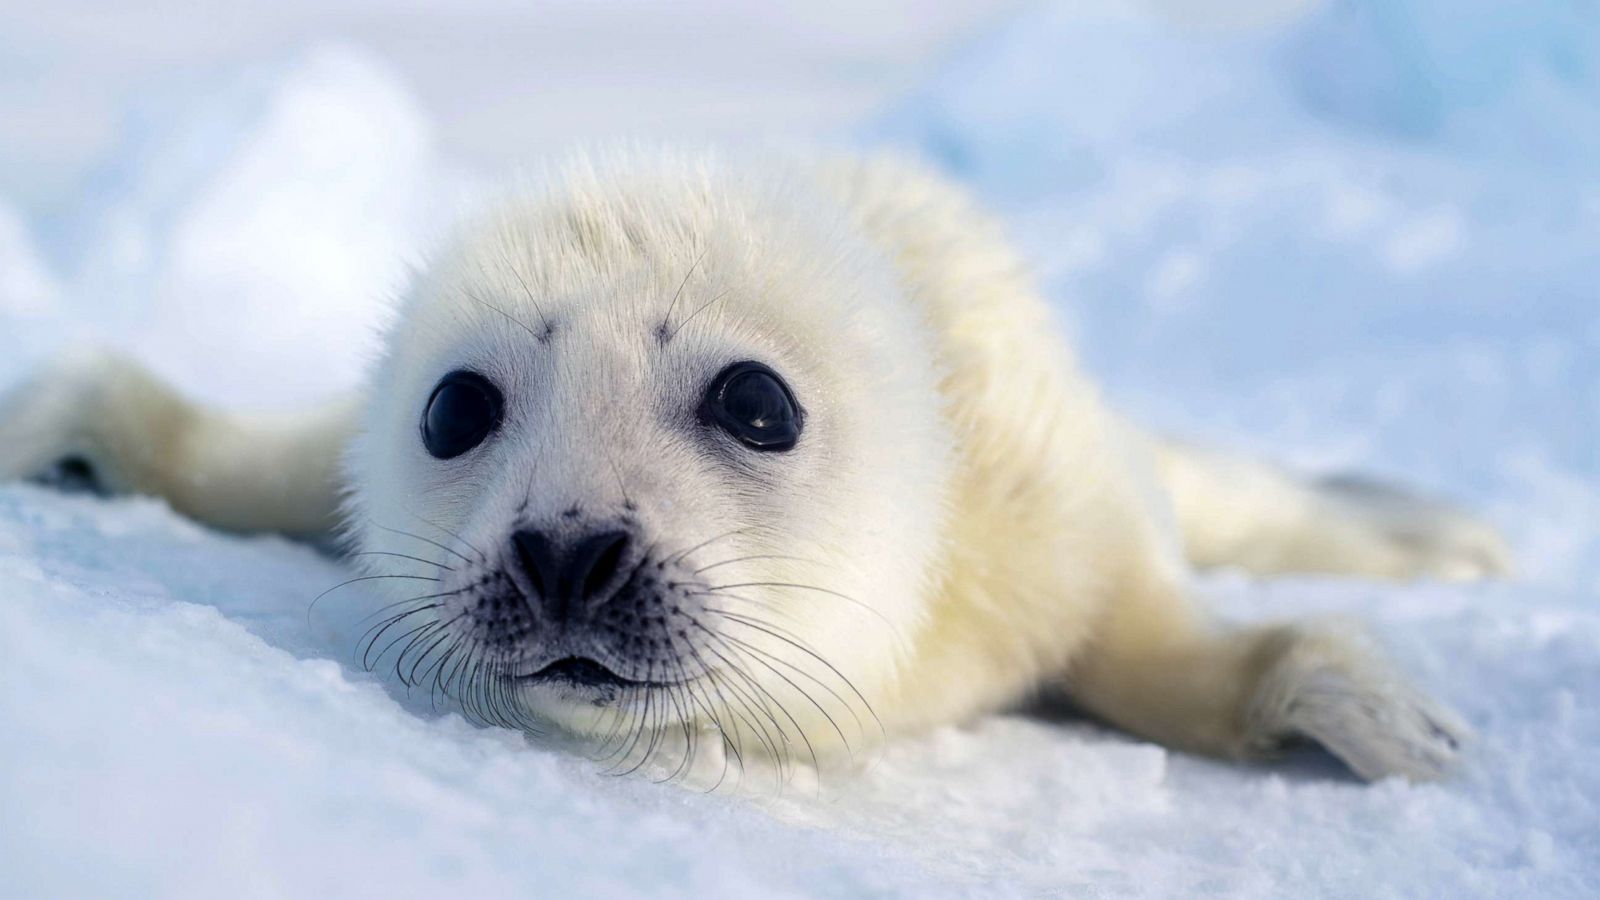 Extraordinary Earth: Here's how harp seal pups rely on ice floes in northwest Atlantic